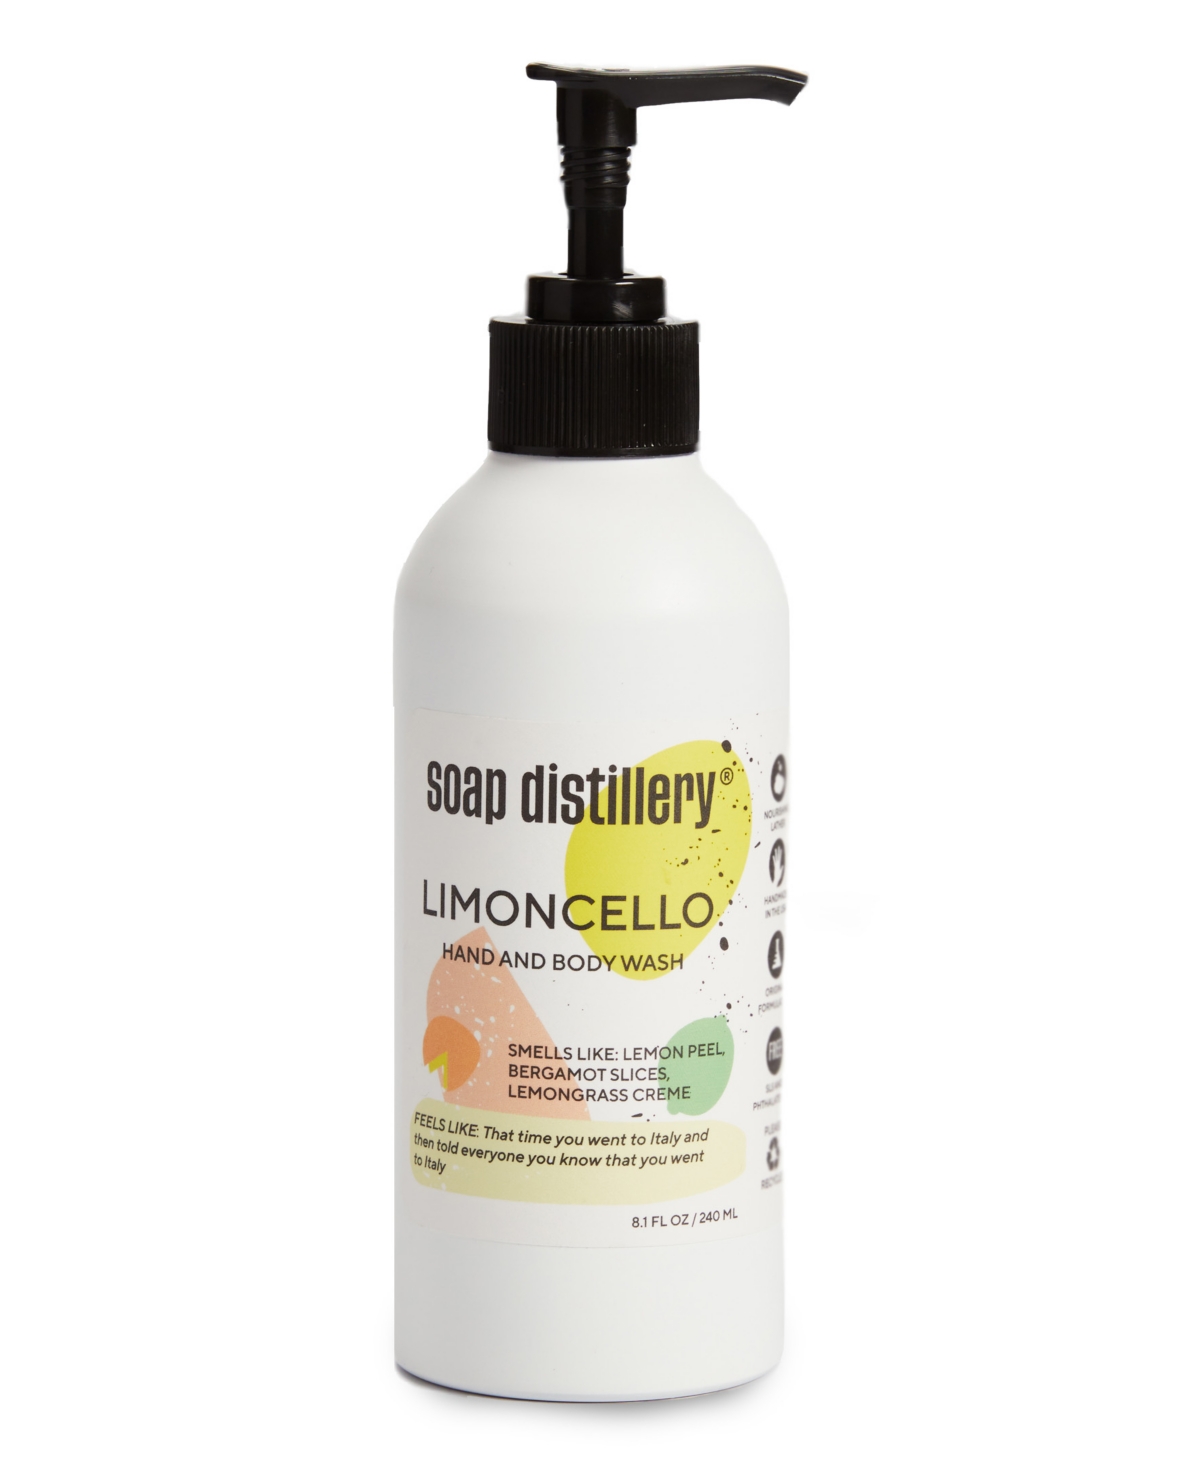 8-Oz Soap Distillery Hand & Body Wash (Limoncello or Sunset Fig) $3.95 & More at Macy's w/ Free Store Pickup